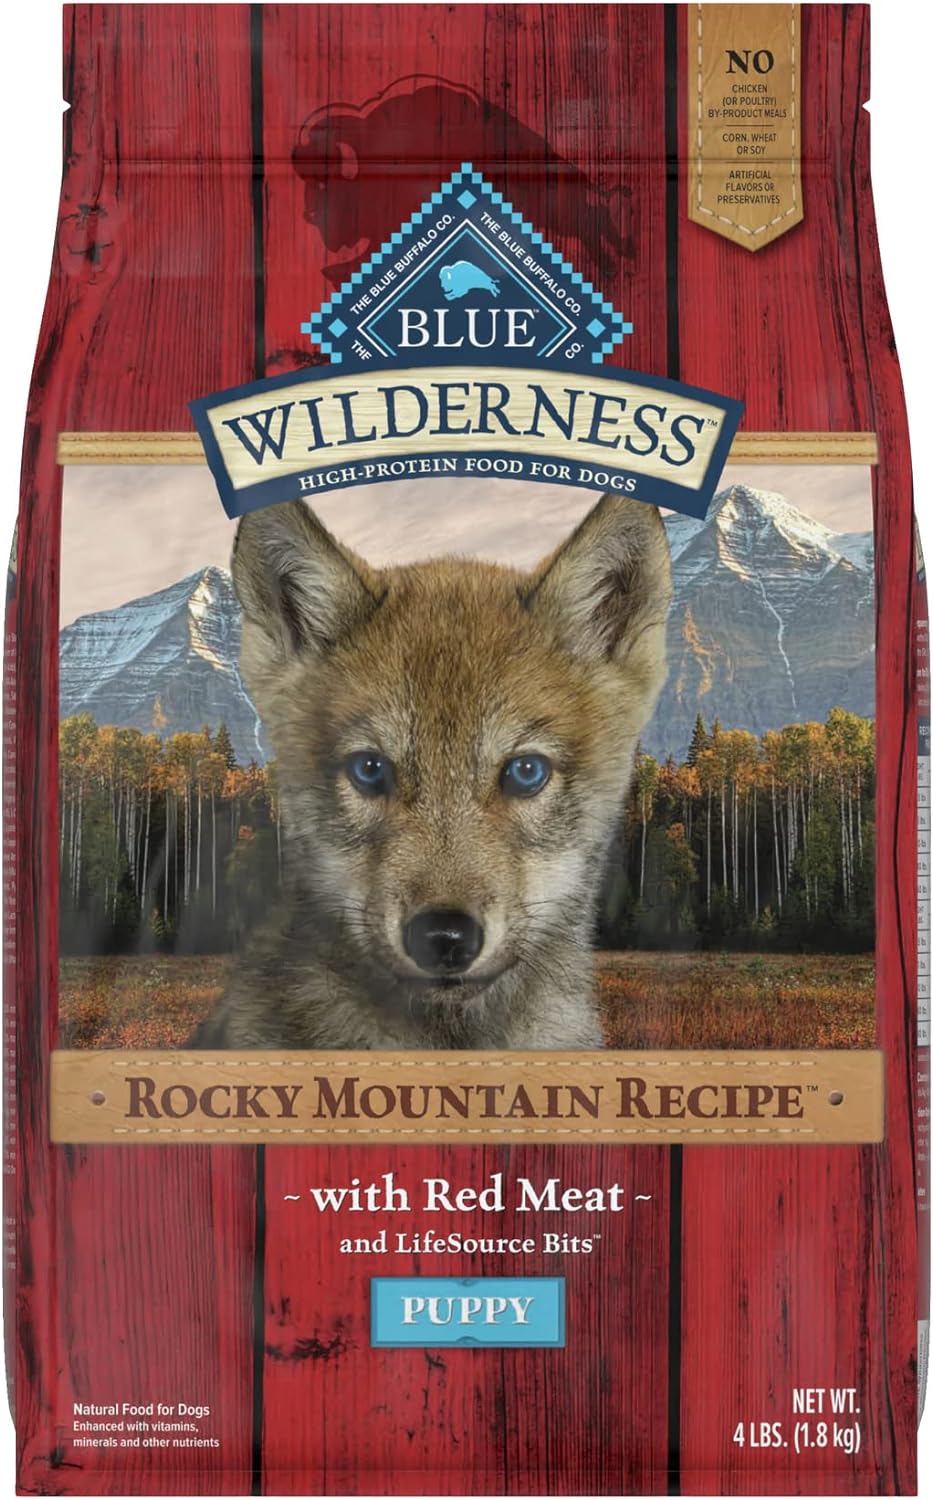 Blue Wilderness Rocky Mountain Recipe Puppy Red Meat Recipe Grain-Free Dry Dog Food – Gallery Image 1